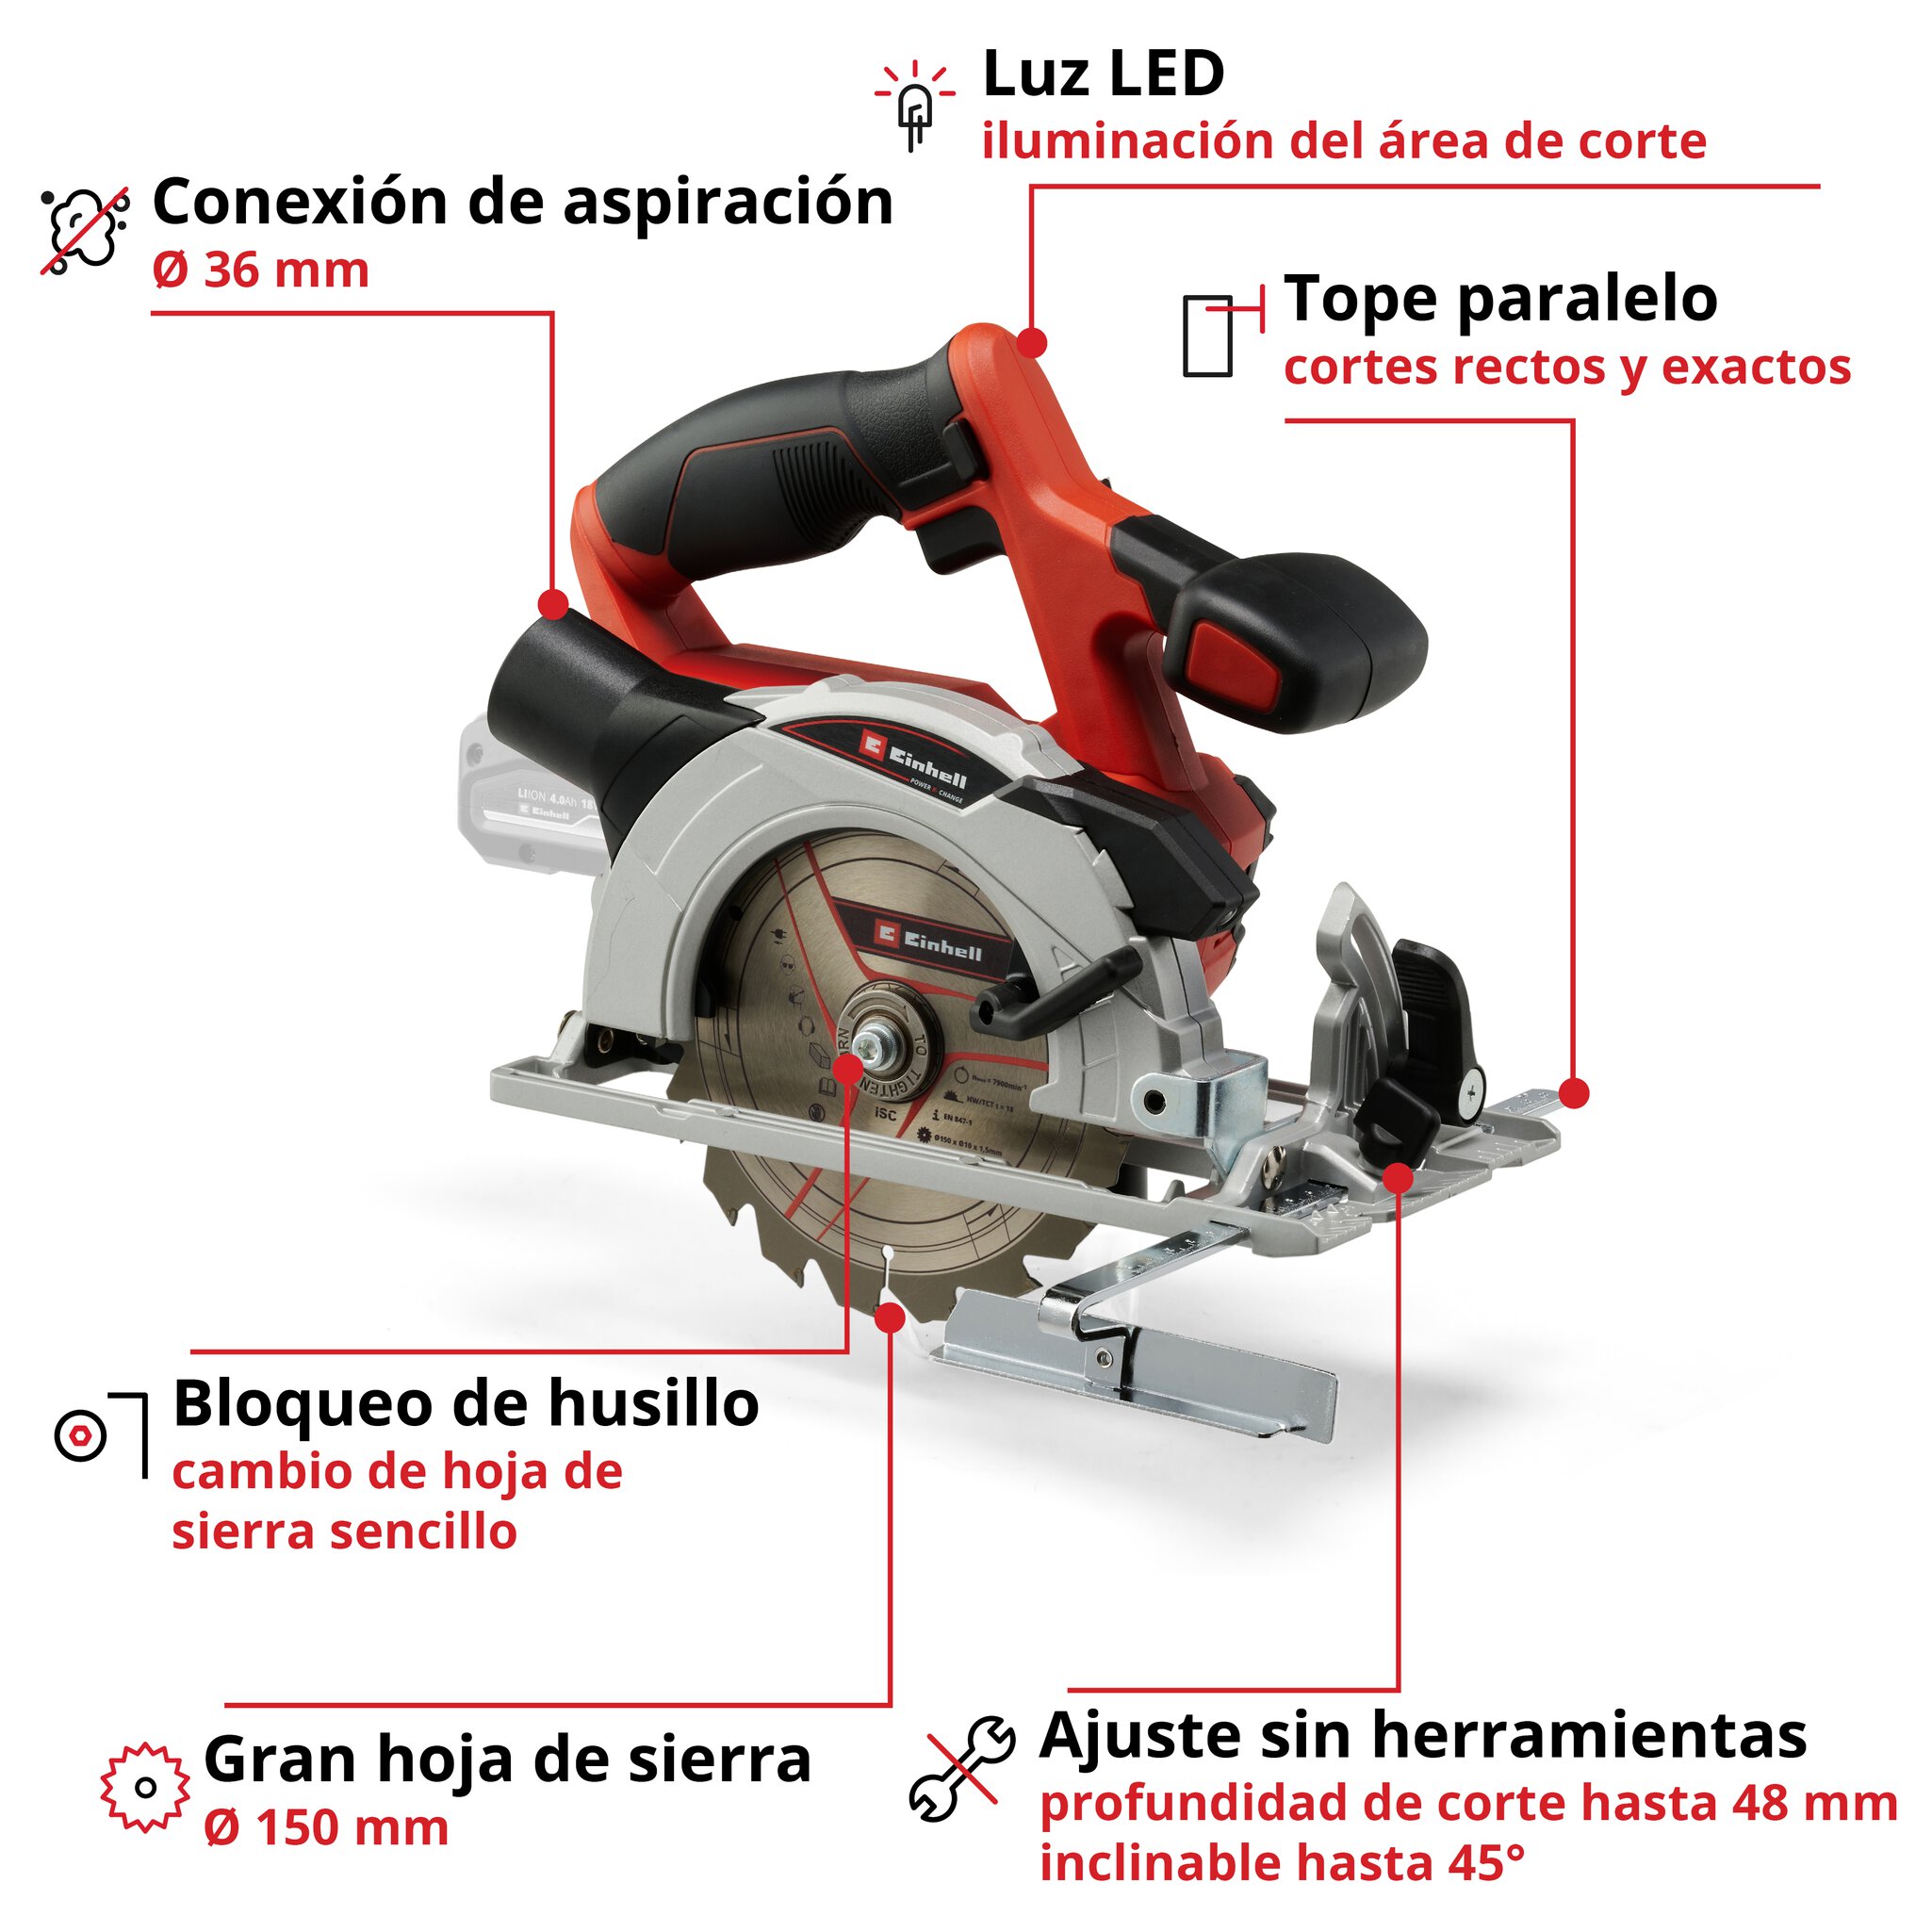 einhell-expert-cordless-circular-saw-4331220-key_feature_image-001